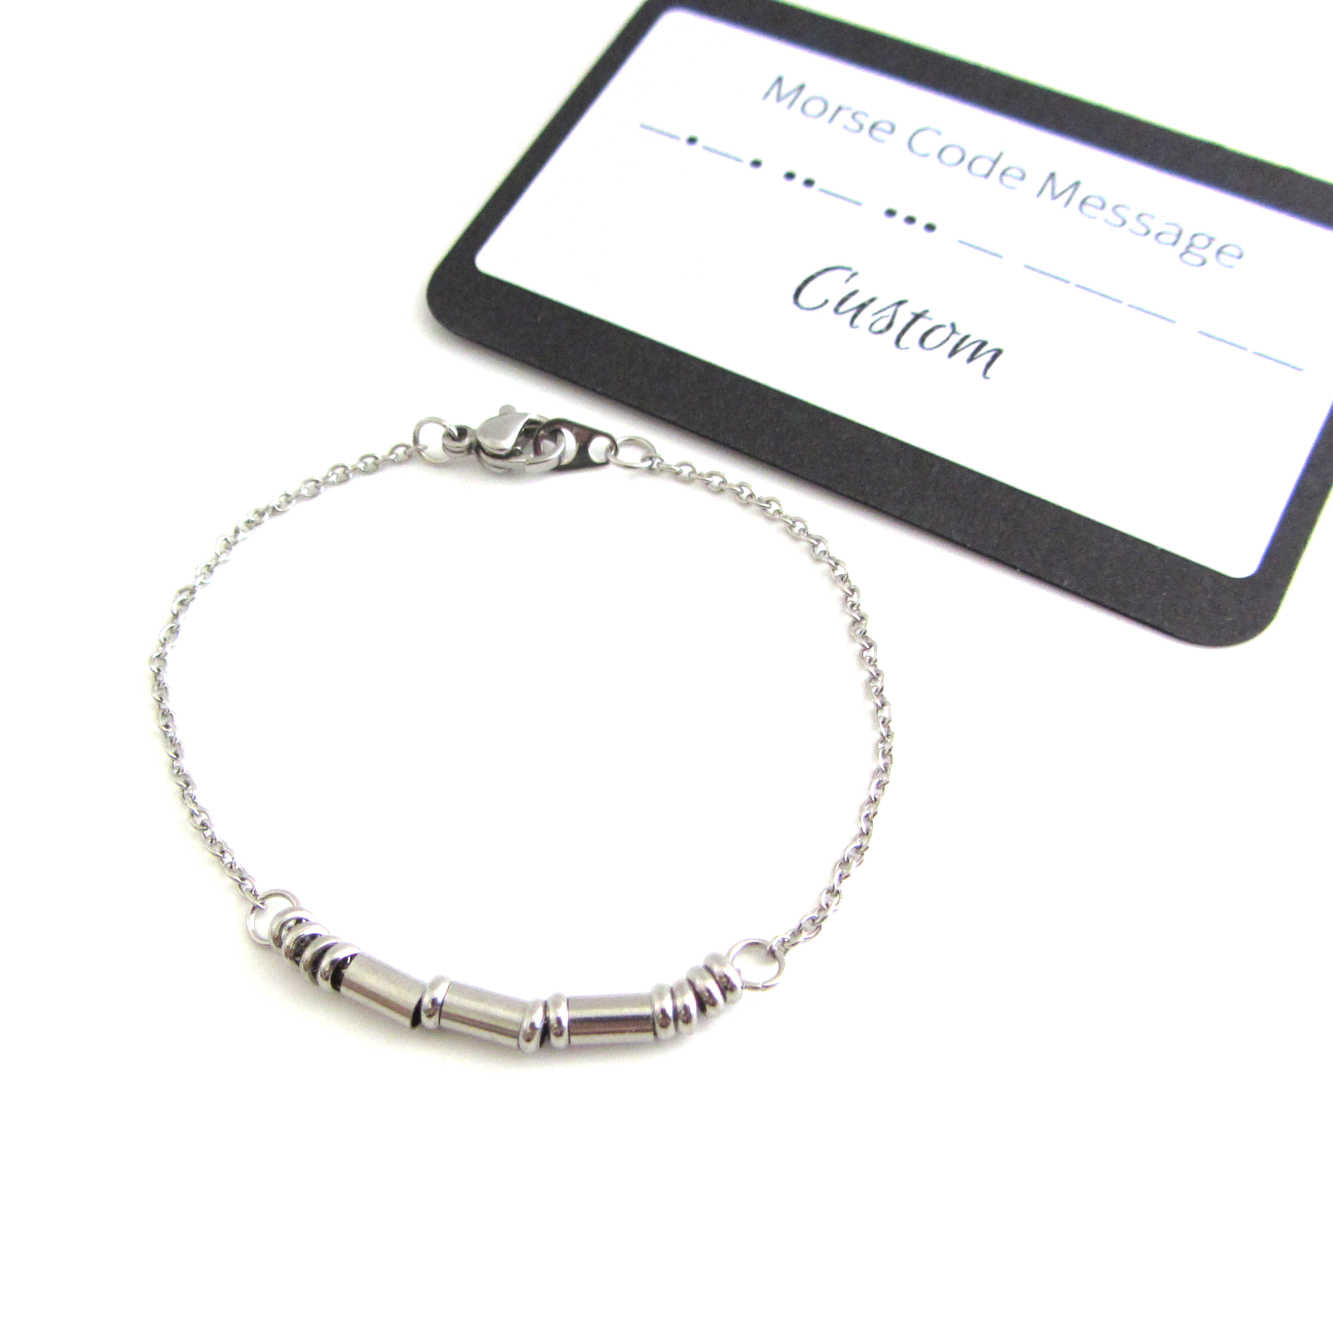 'sarah' name bracelet written in morse code stainless steel beads on a stainless steel chain with custom morse code message card